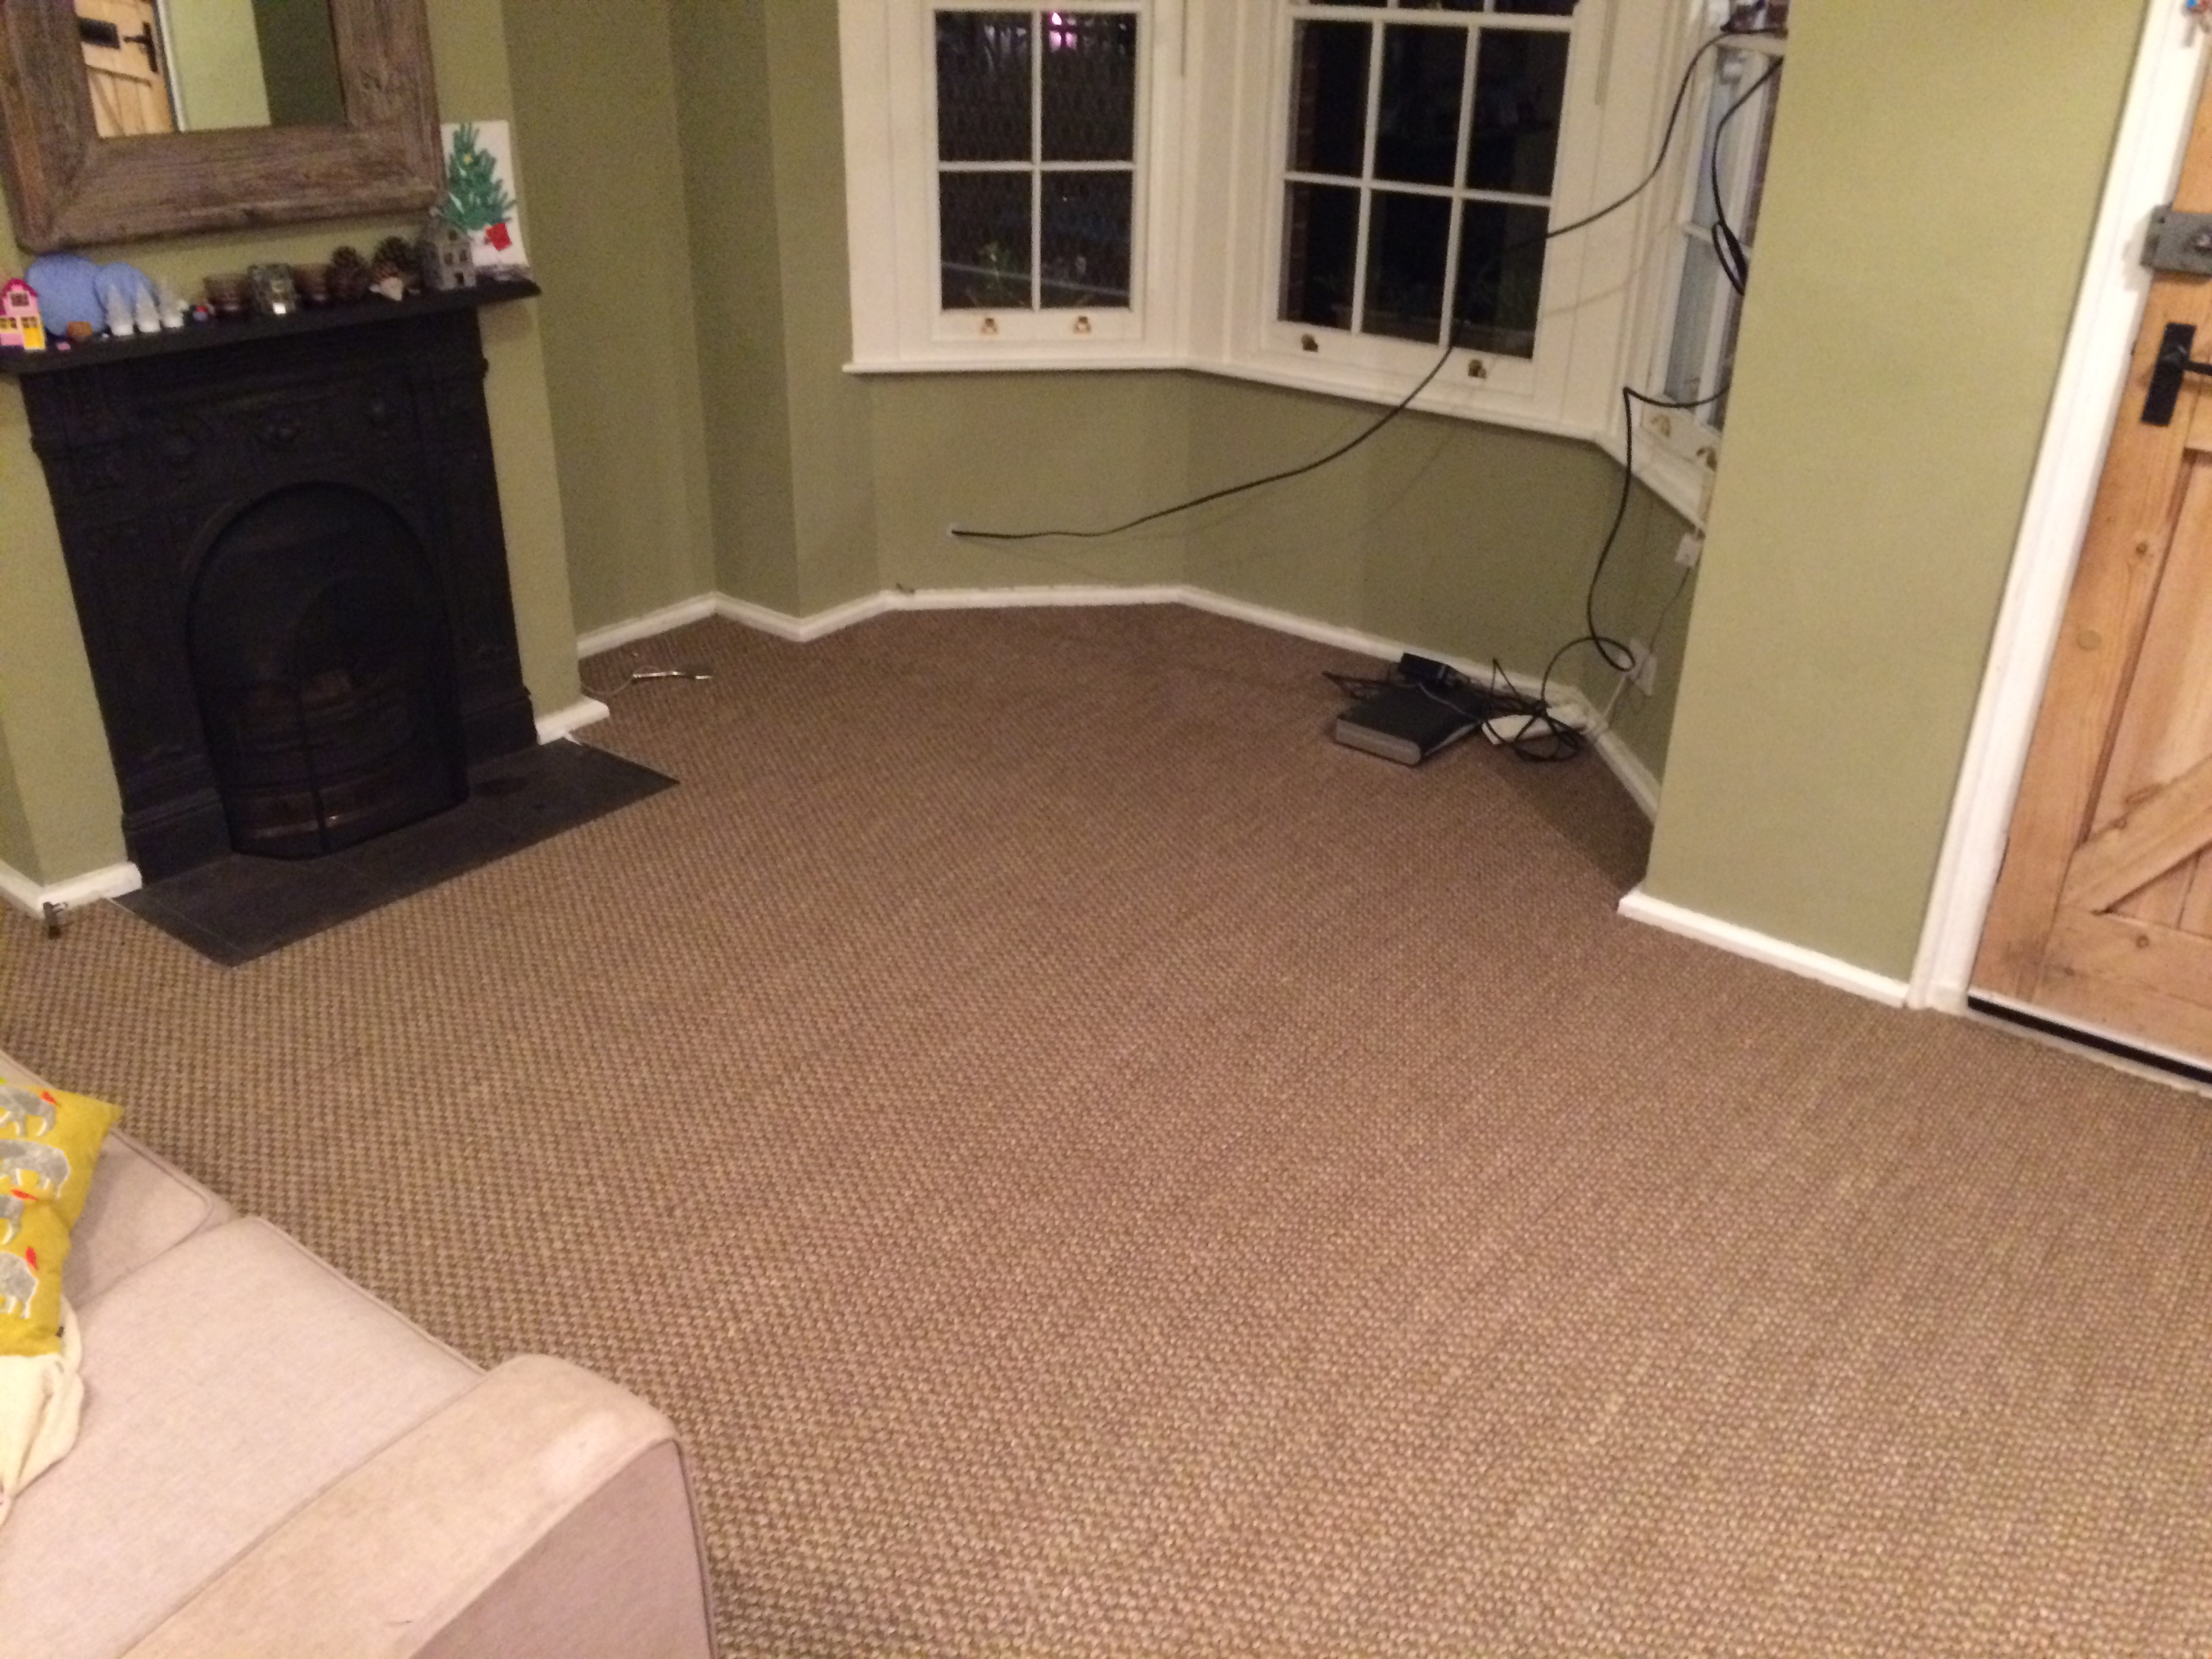 5 Vital Questions to Ask Your Potential Carpet Fitter